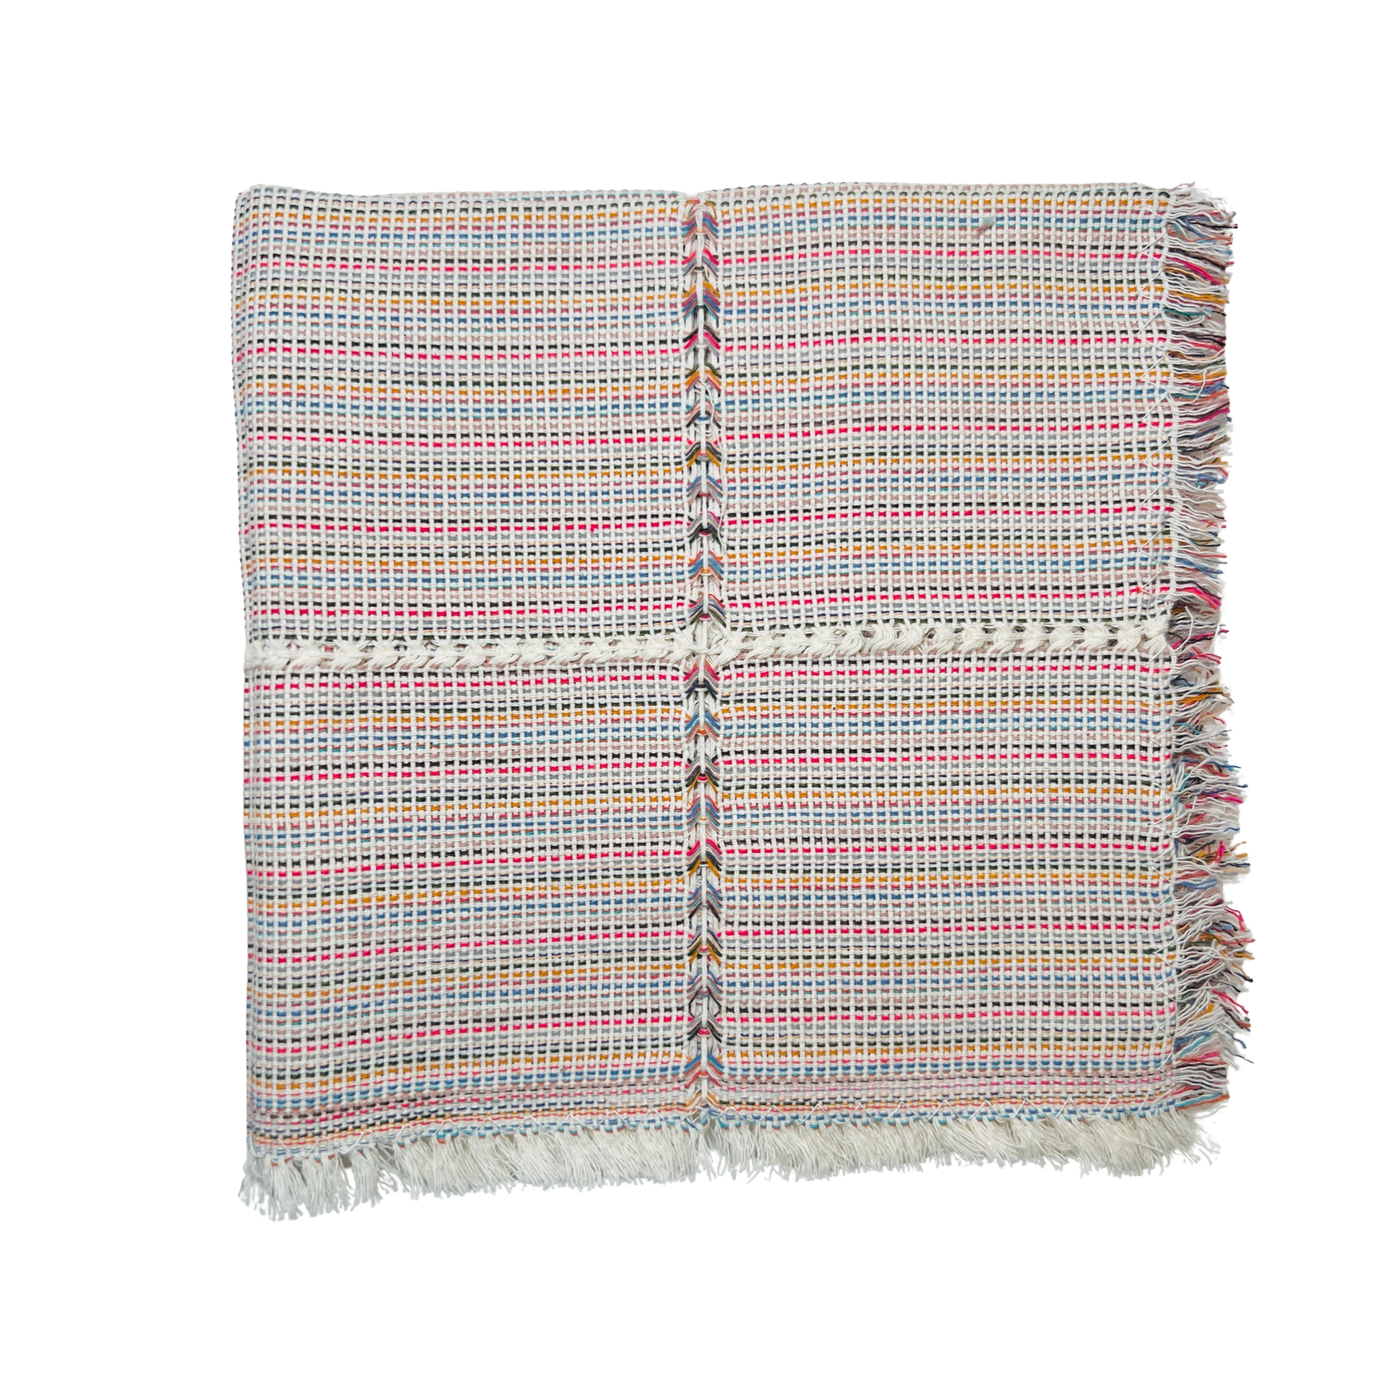 natural multi-colored striped handwoven napkin folded in quarters. Thin stripes consist of the following colors: red, tan, light blue, black, beige